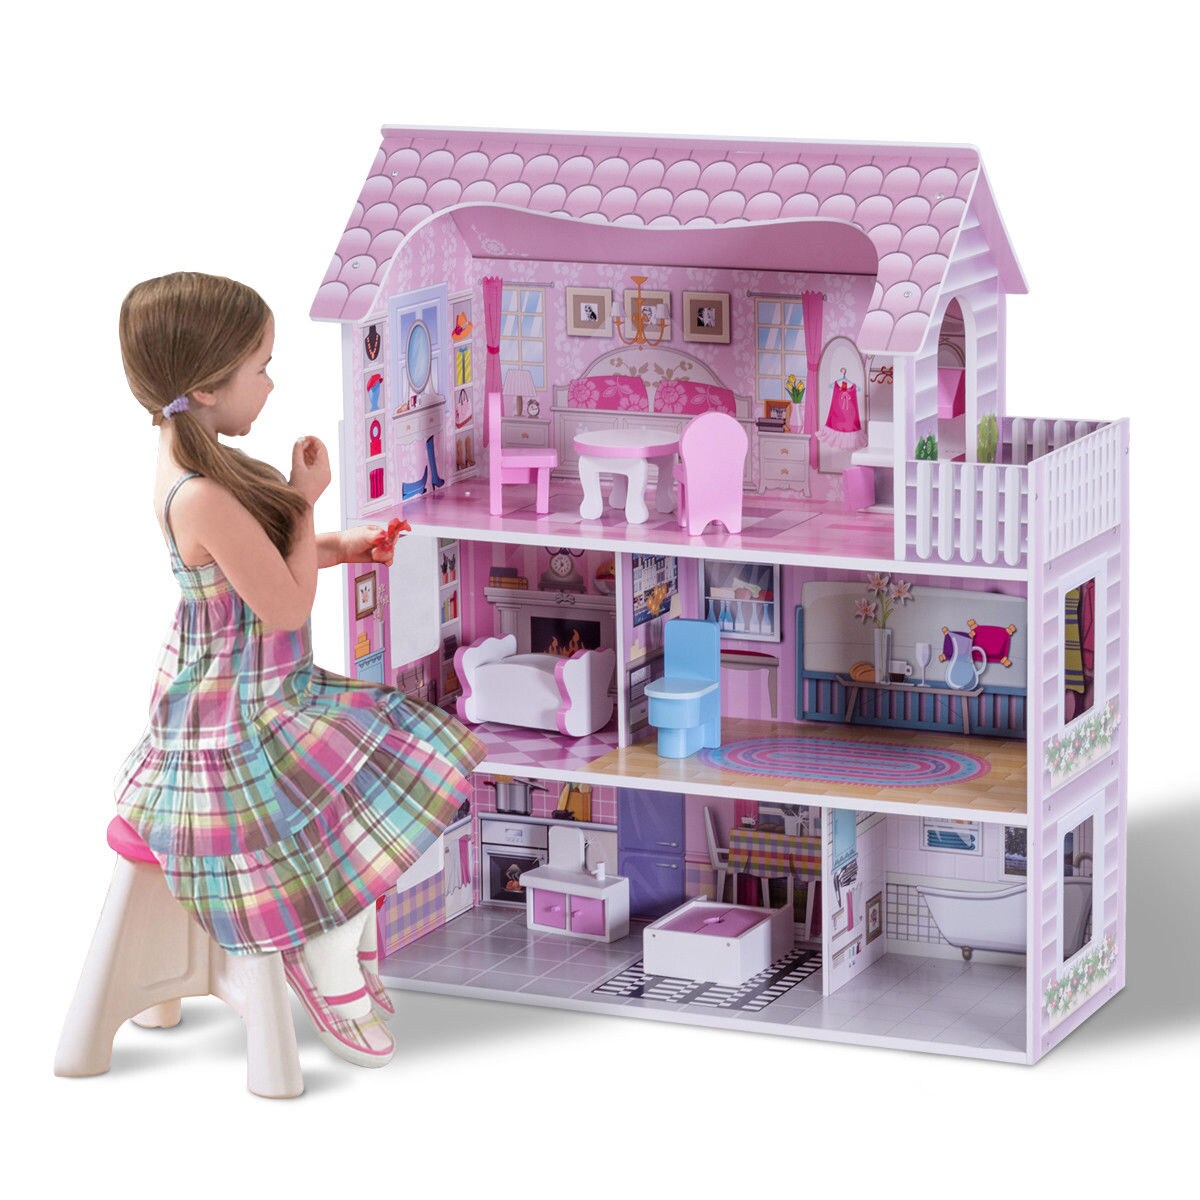 Gymax 28 Pink Dollhouse w/ Furniture Gliding Elevator Rooms 3 Levels Young Girls Toy